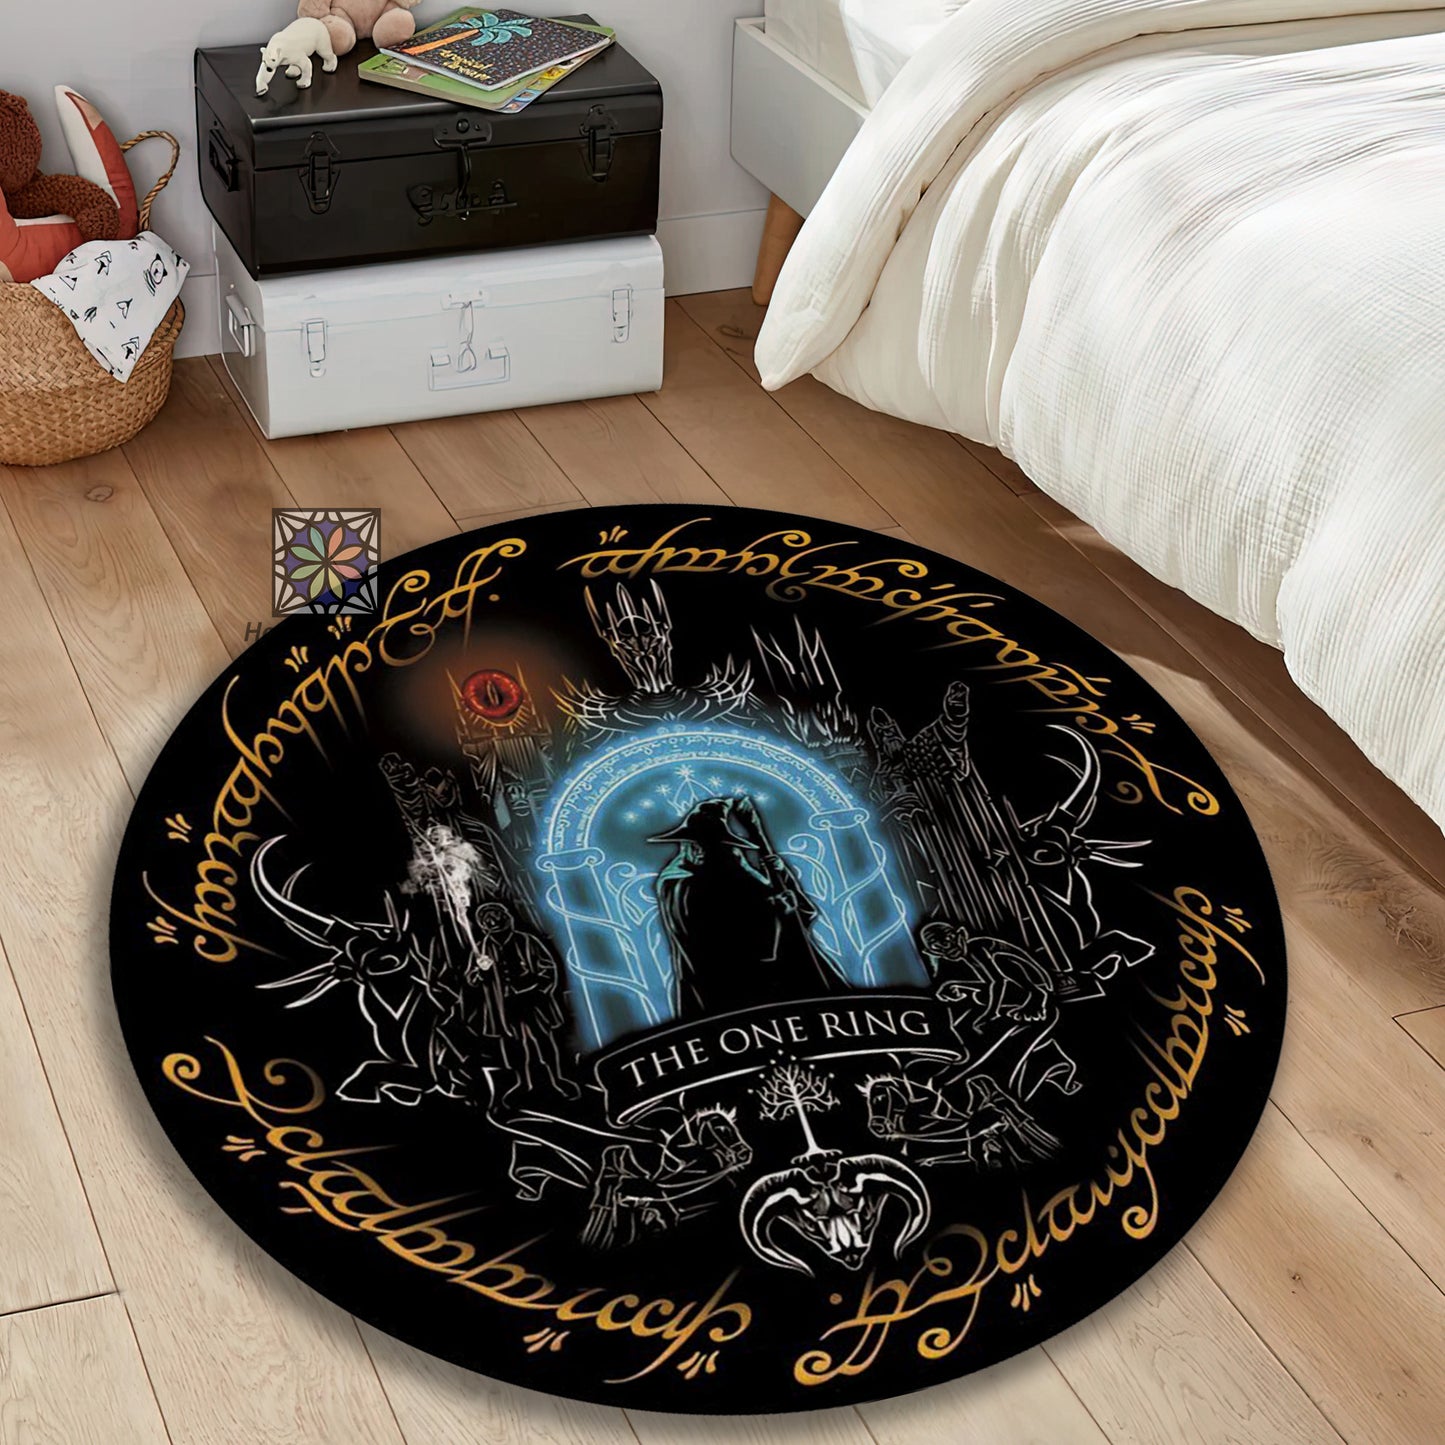 Vintage The Lord of The Rings Rug, The One Rings Carpet, Fantastic Movie Decor, Hobbiton Mat